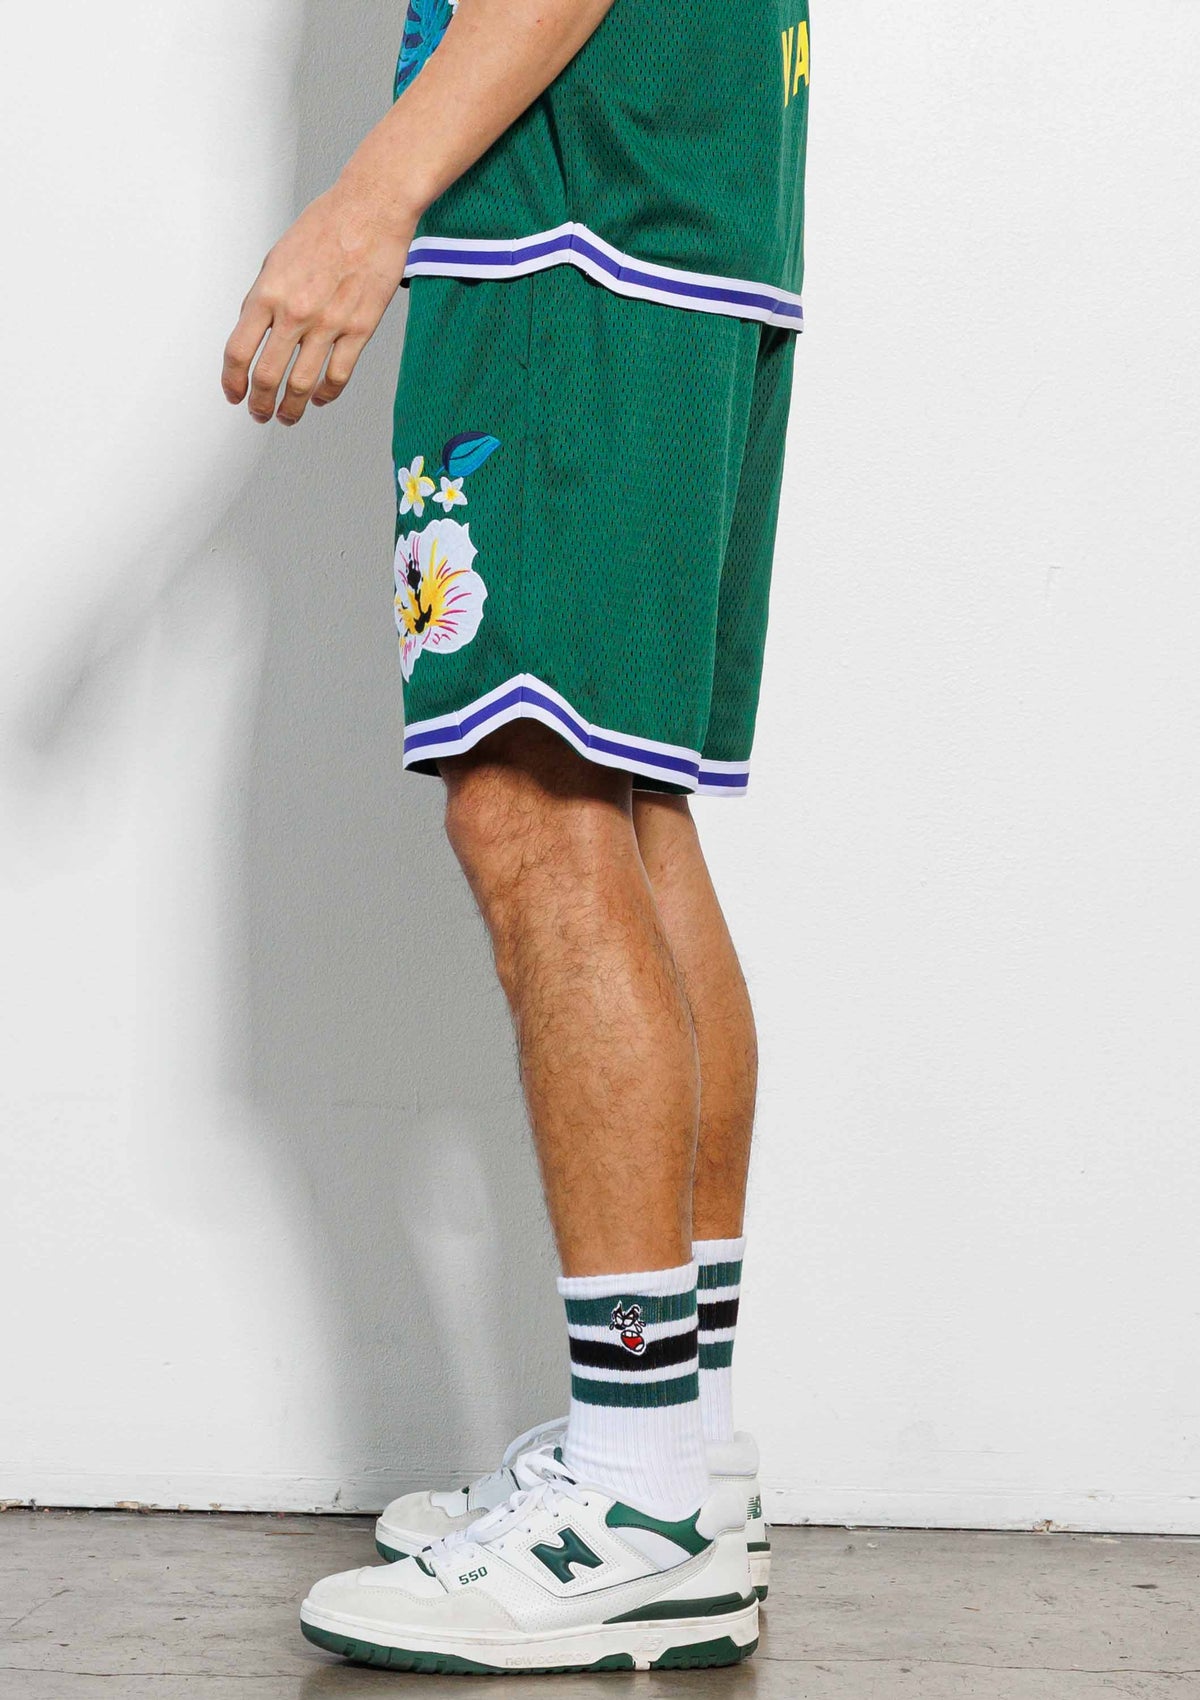 Shorts with Side Patches - Men - Ready-to-Wear